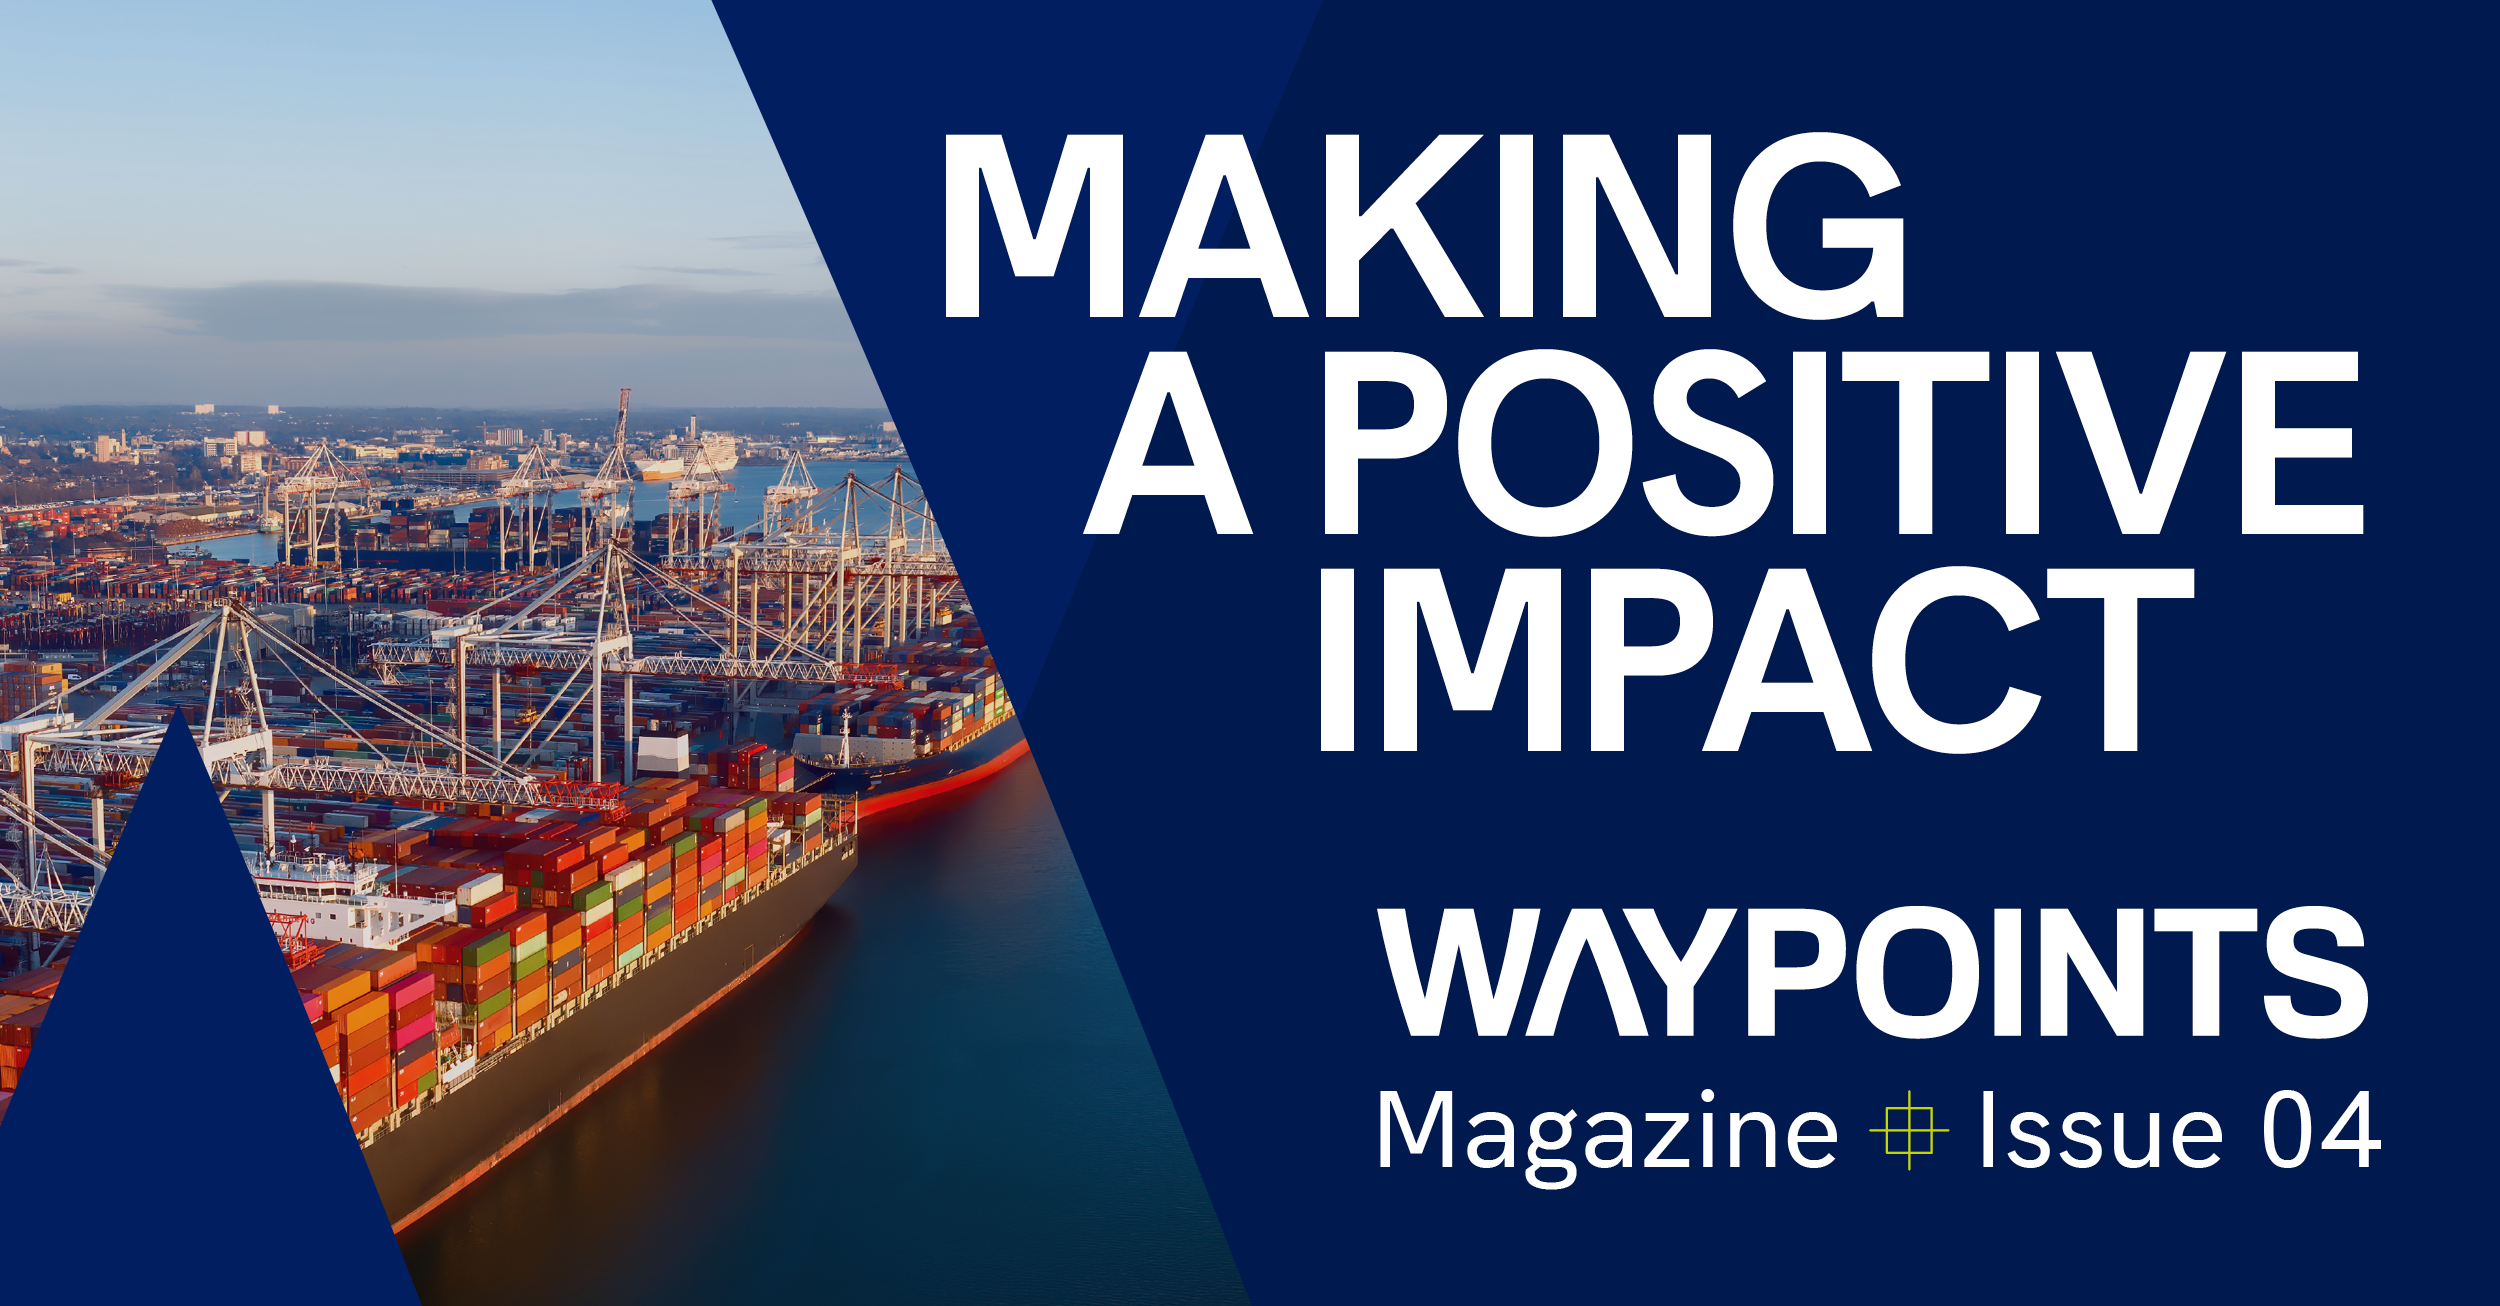 Making a Positive Impact - Waypoints Issue 04